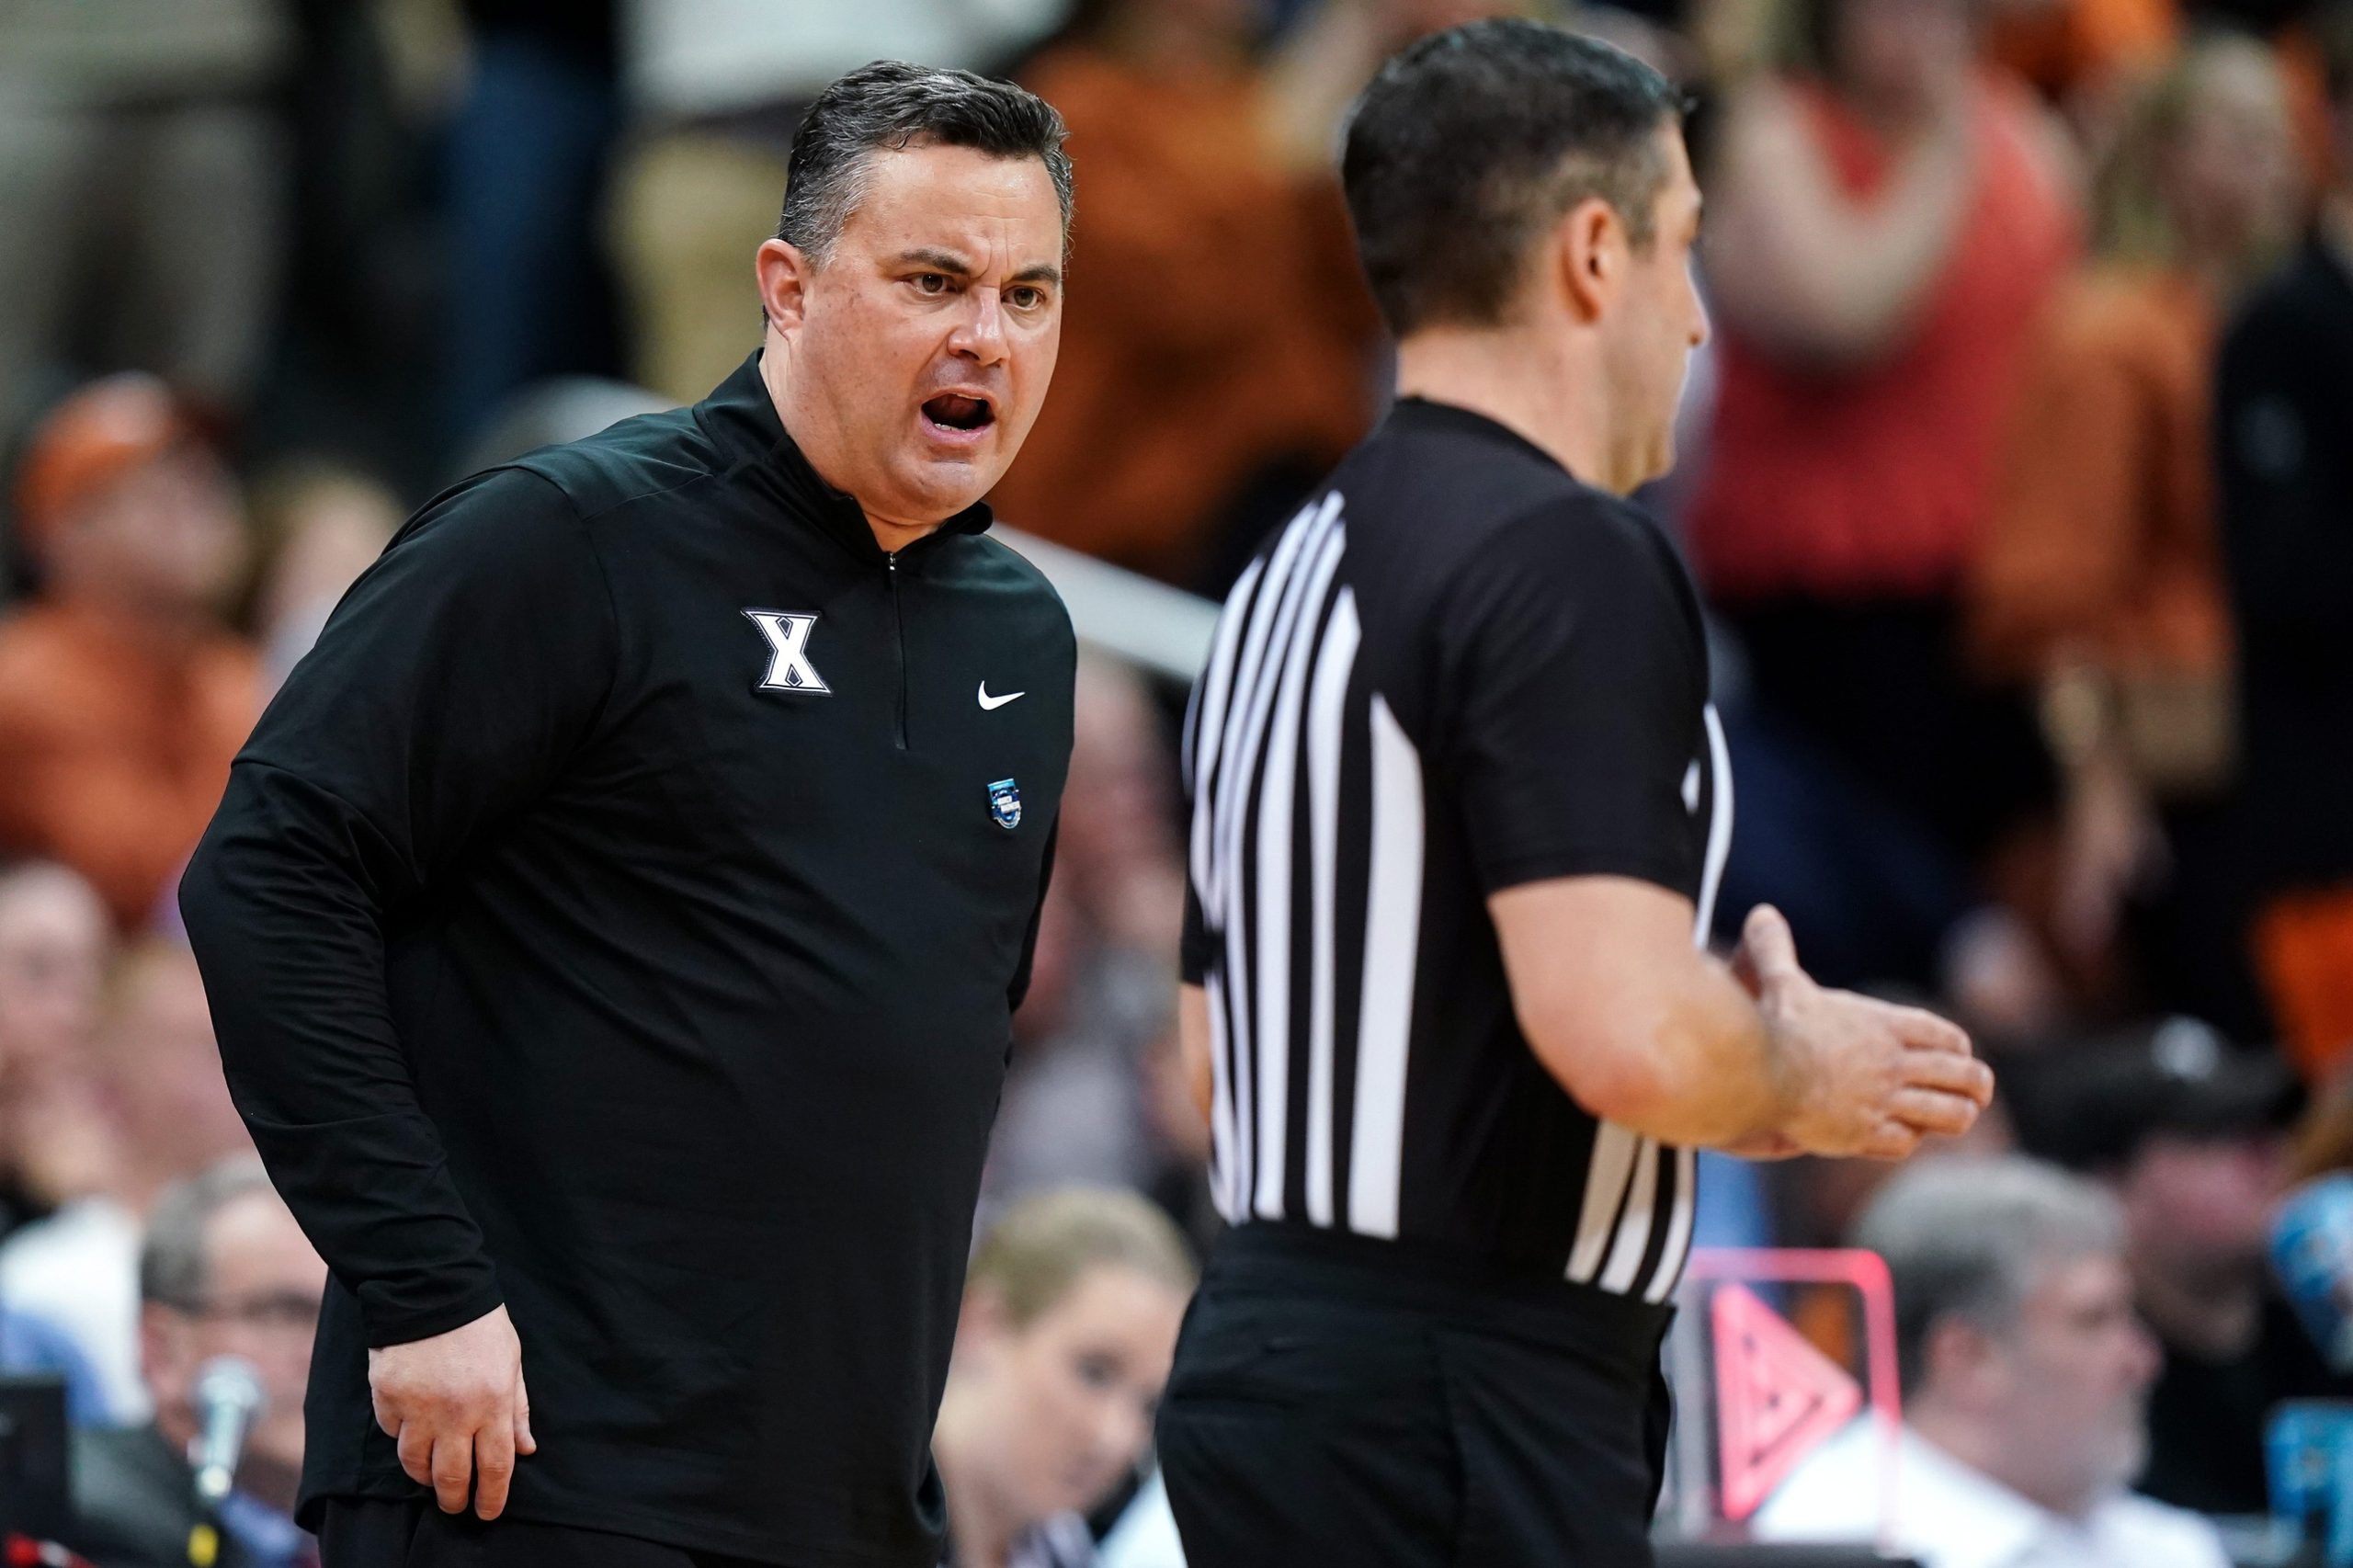 Xavier Musketeers head coach Sean Miller talks with an official during the first half of a Sweet 16 college basketball game between the Xavier Musketeers and the Texas Longhorns in the Midwest Regional of the NCAA Tournament, Friday, March 24, 2023, at T-Mobile Center in Kansas City, Mo. Ncaa Xavier Texas Ncaa Sweet 16 March 24 0365